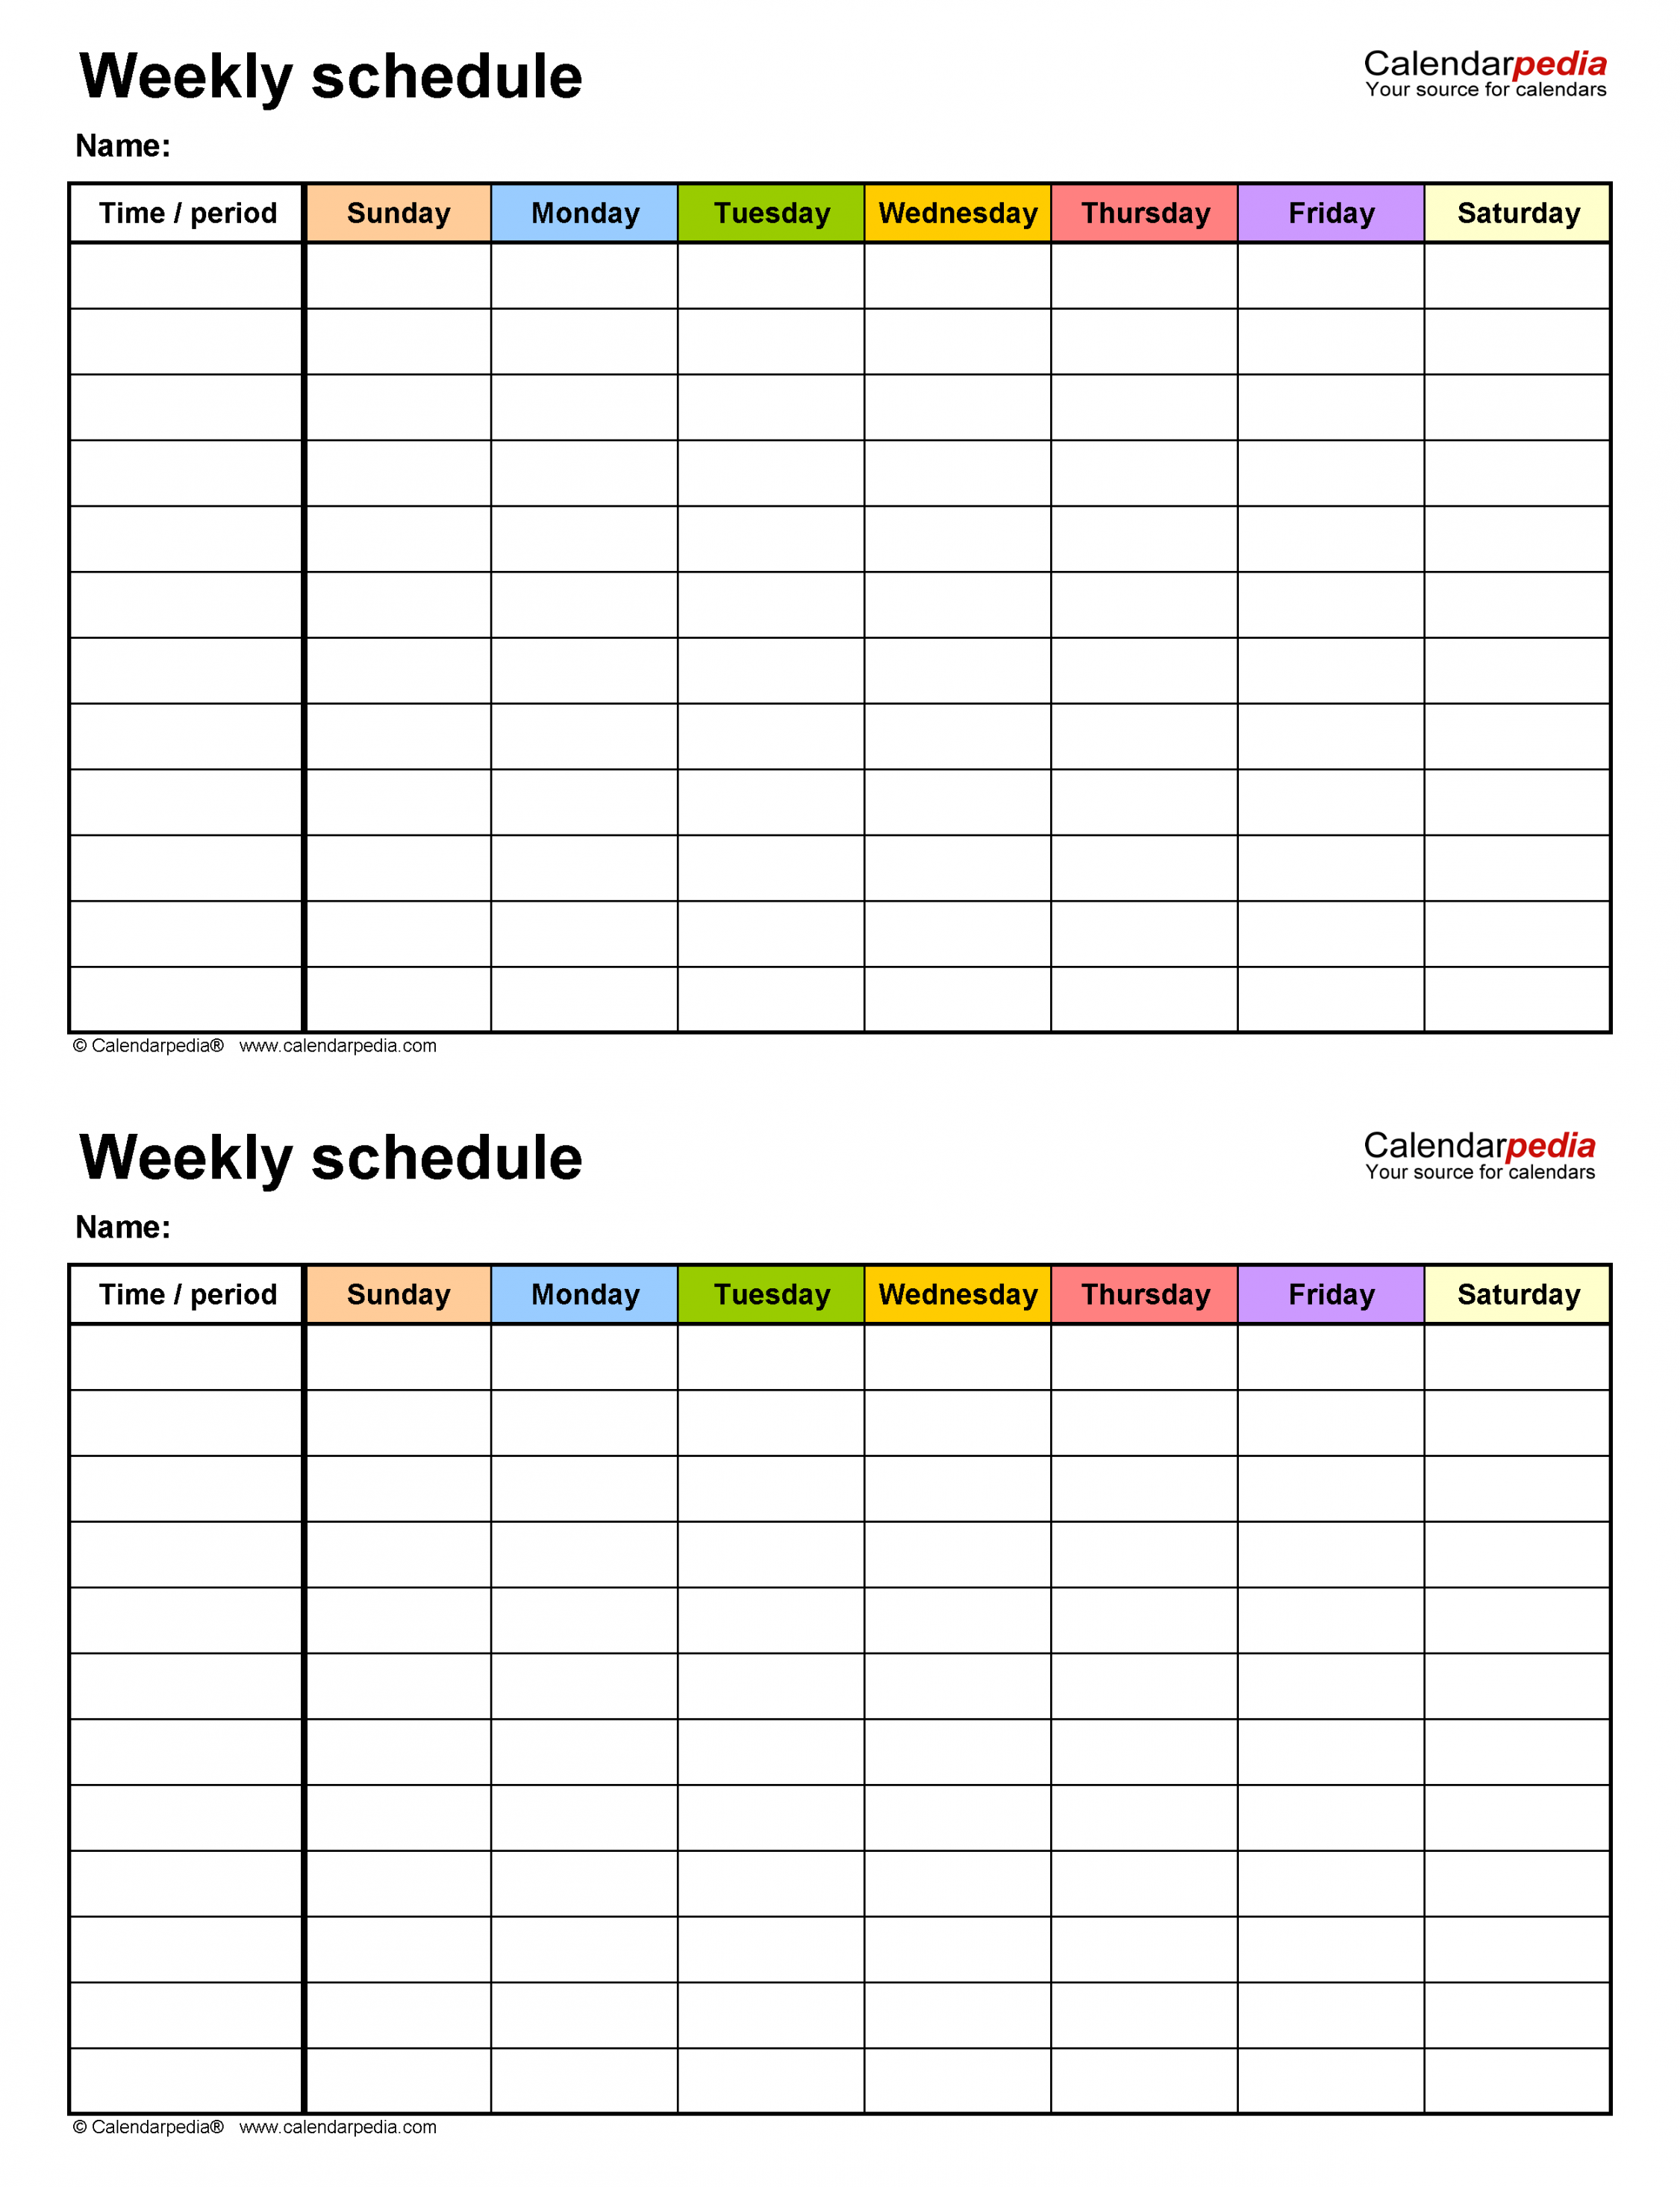 Free Weekly Schedules for Word -  Templates